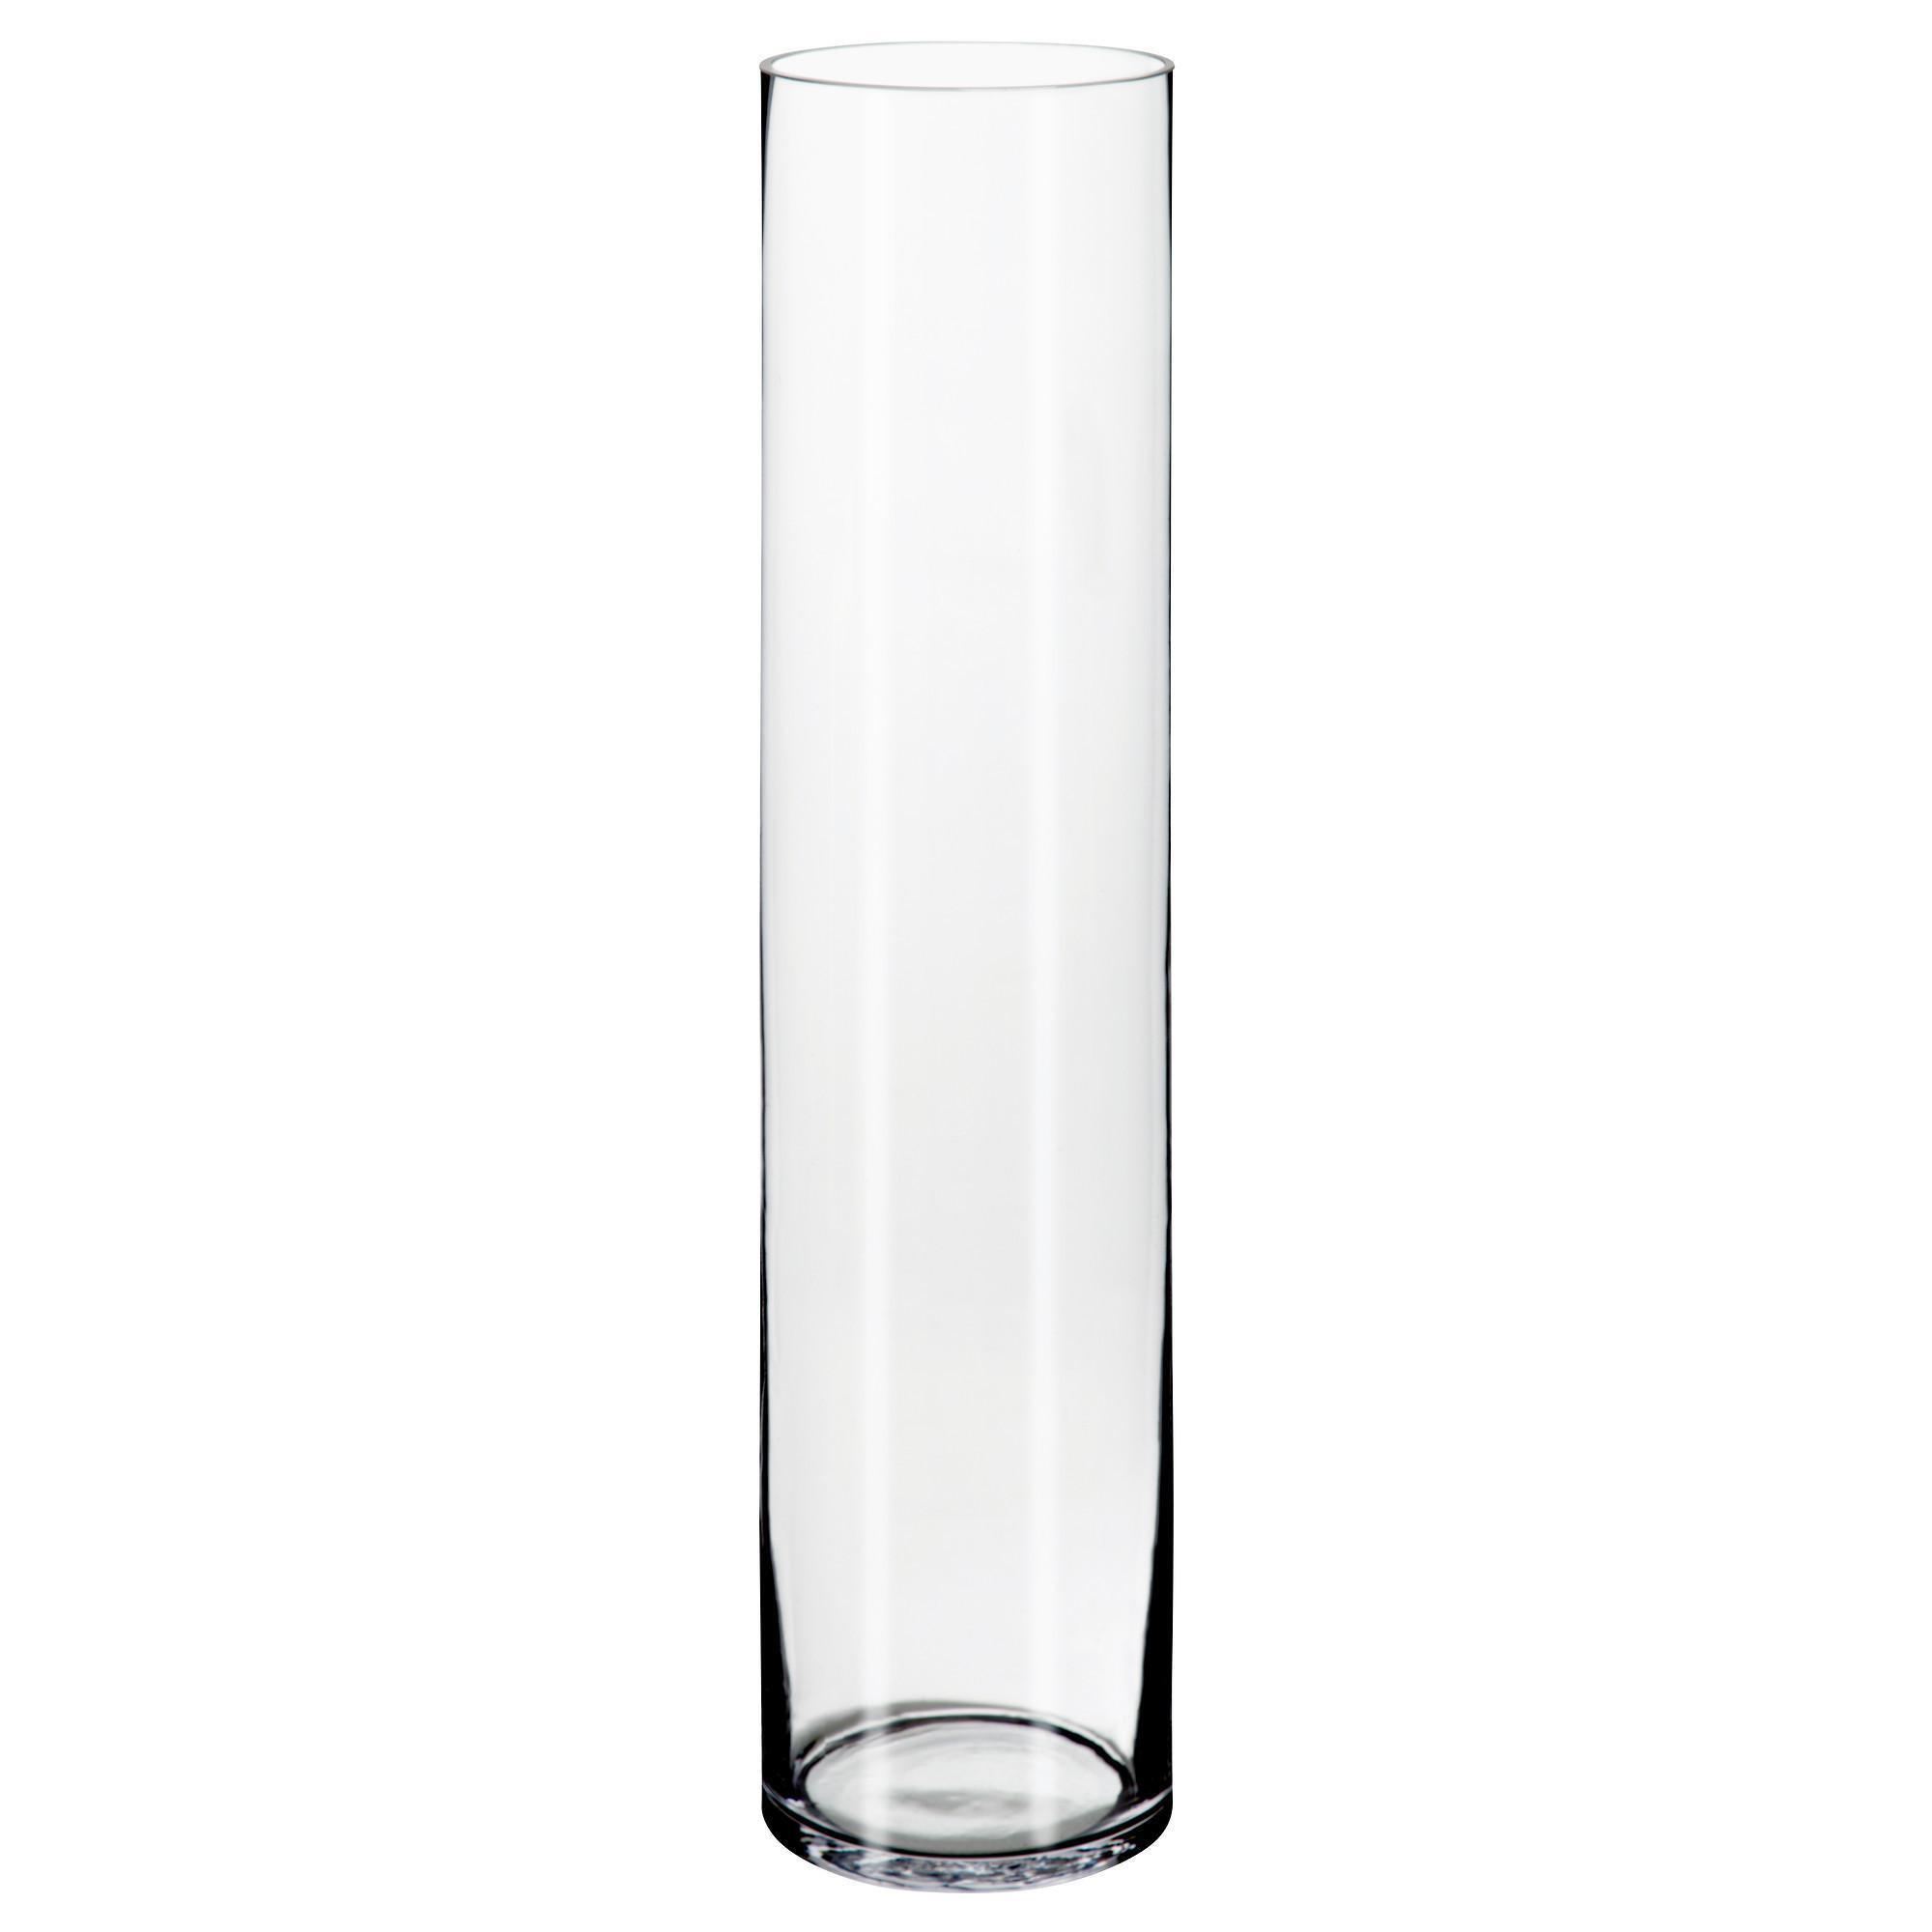 22 Recommended Cheap Glass Hurricane Vases 2022 free download cheap glass hurricane vases of rugs in living room fresh 50 oval rugs for living room elegant within rugs in living room new home design white shag rug ikea awesome living room vase glass